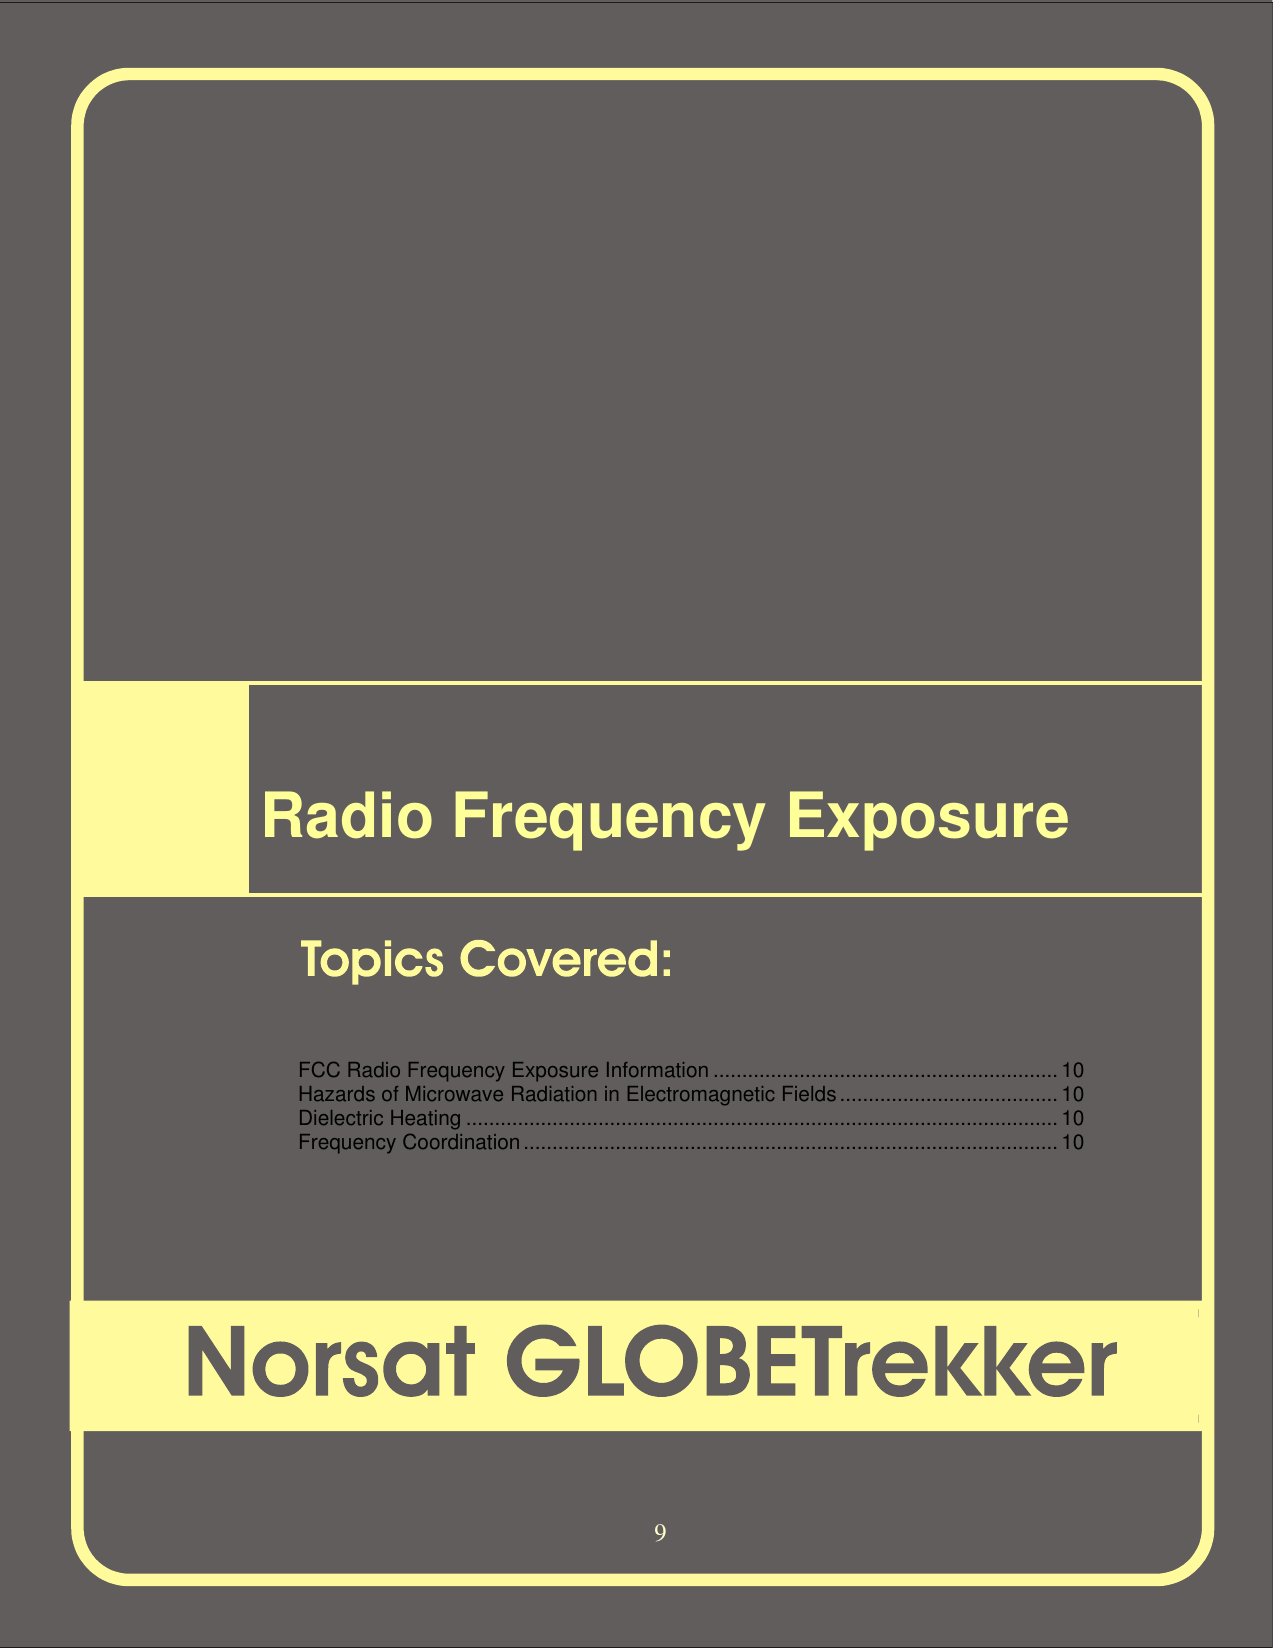   9                        Radio Frequency Exposure        FCC Radio Frequency Exposure Information............................................................10 Hazards of Microwave Radiation in Electromagnetic Fields......................................10 Dielectric Heating.......................................................................................................10 Frequency Coordination.............................................................................................10   